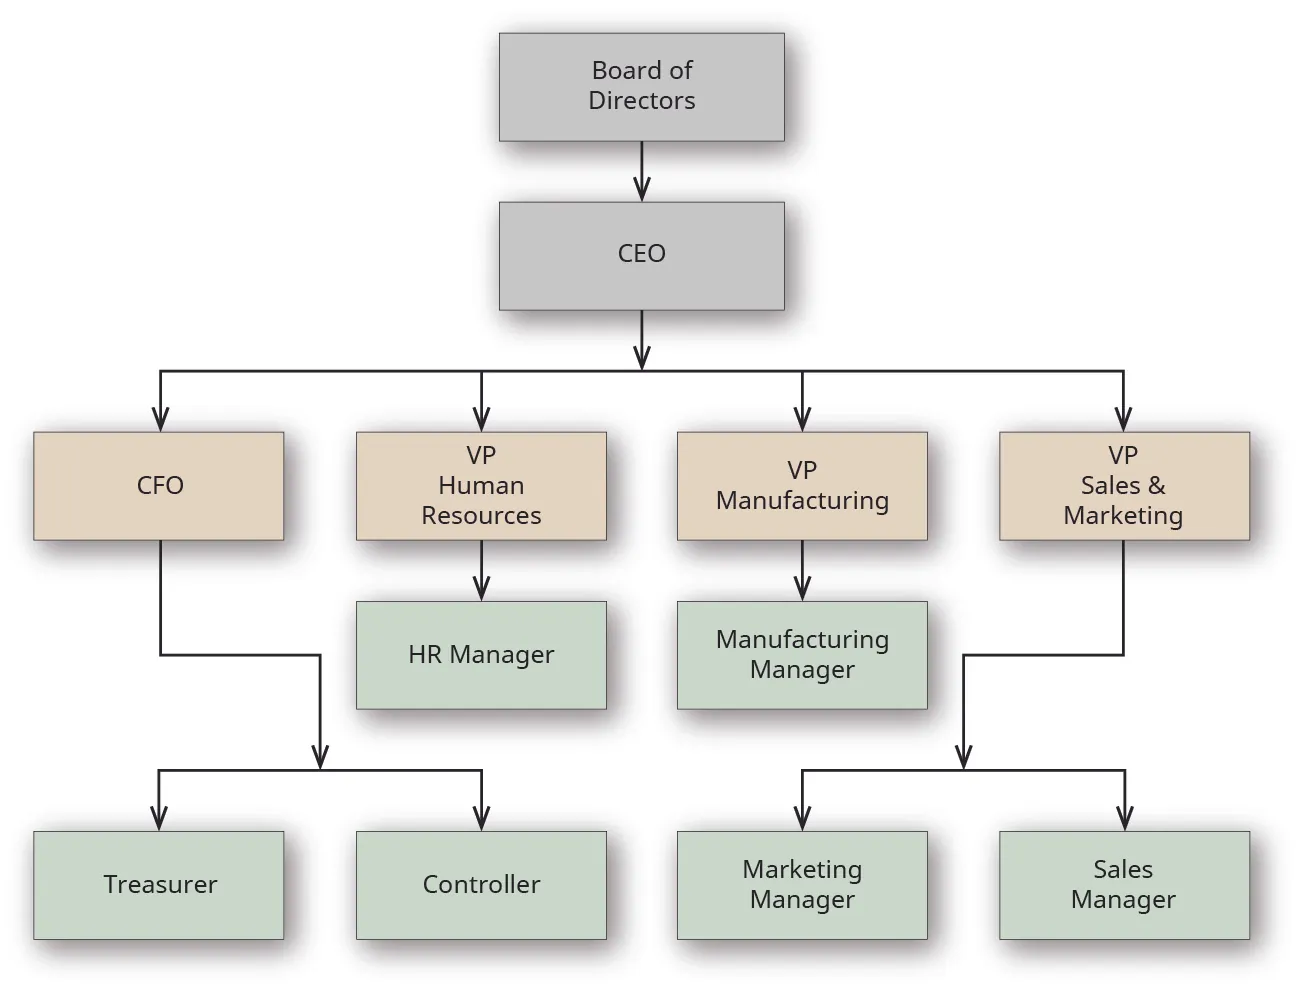 A chart outlines workflow for an organization. At the top is the board of directors. Below that is the CEO. The line below that is CFO, VP Human Resources, VP Manufacturing, and VP Sales and Marketing. Below the CFO is Treasurer and Controller. Below VP Human Resources is HR Manager. Below VP Manufacturing is Manufacturing Manager. Below VP Sales and Marketing is Marketing Manager and Sales Manager.